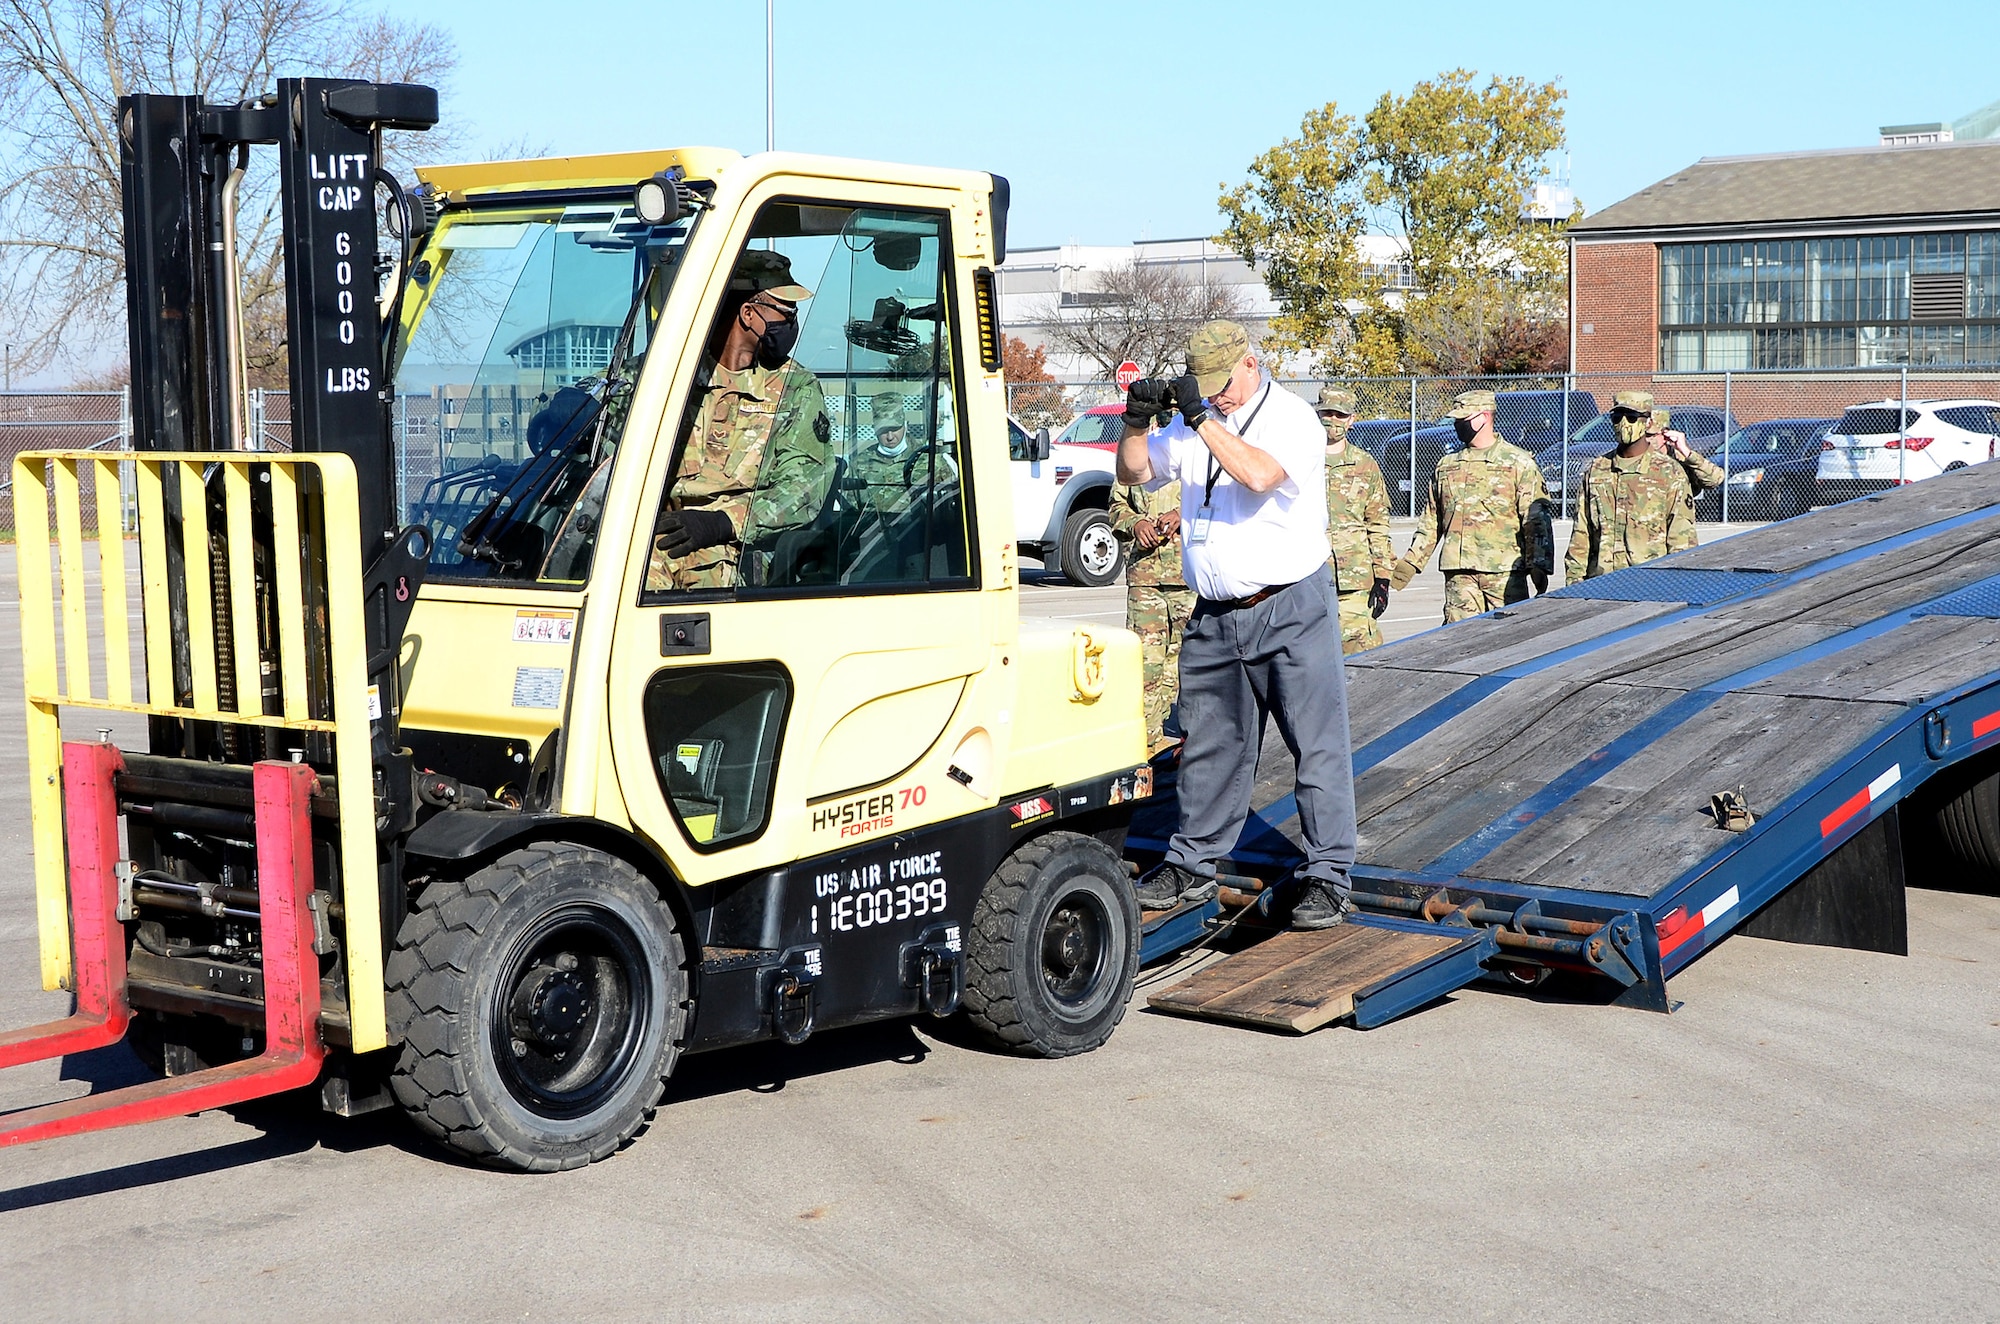 Michael Heaton, an 88th Logistics Readiness Squadron driver, signals Senior Airman Luke Barnes, 445th Logistics Readiness Squadron ground transportation operator, to stop as he guides him up the tilt bed trailer, Nov. 6, 2020, Wright-Patterson Air Force Base, Ohio. Ensuring the tires of the forklift are lined up with the trailer is paramount to prevent damage while preparing the vehicle for transport as quickly as possible.